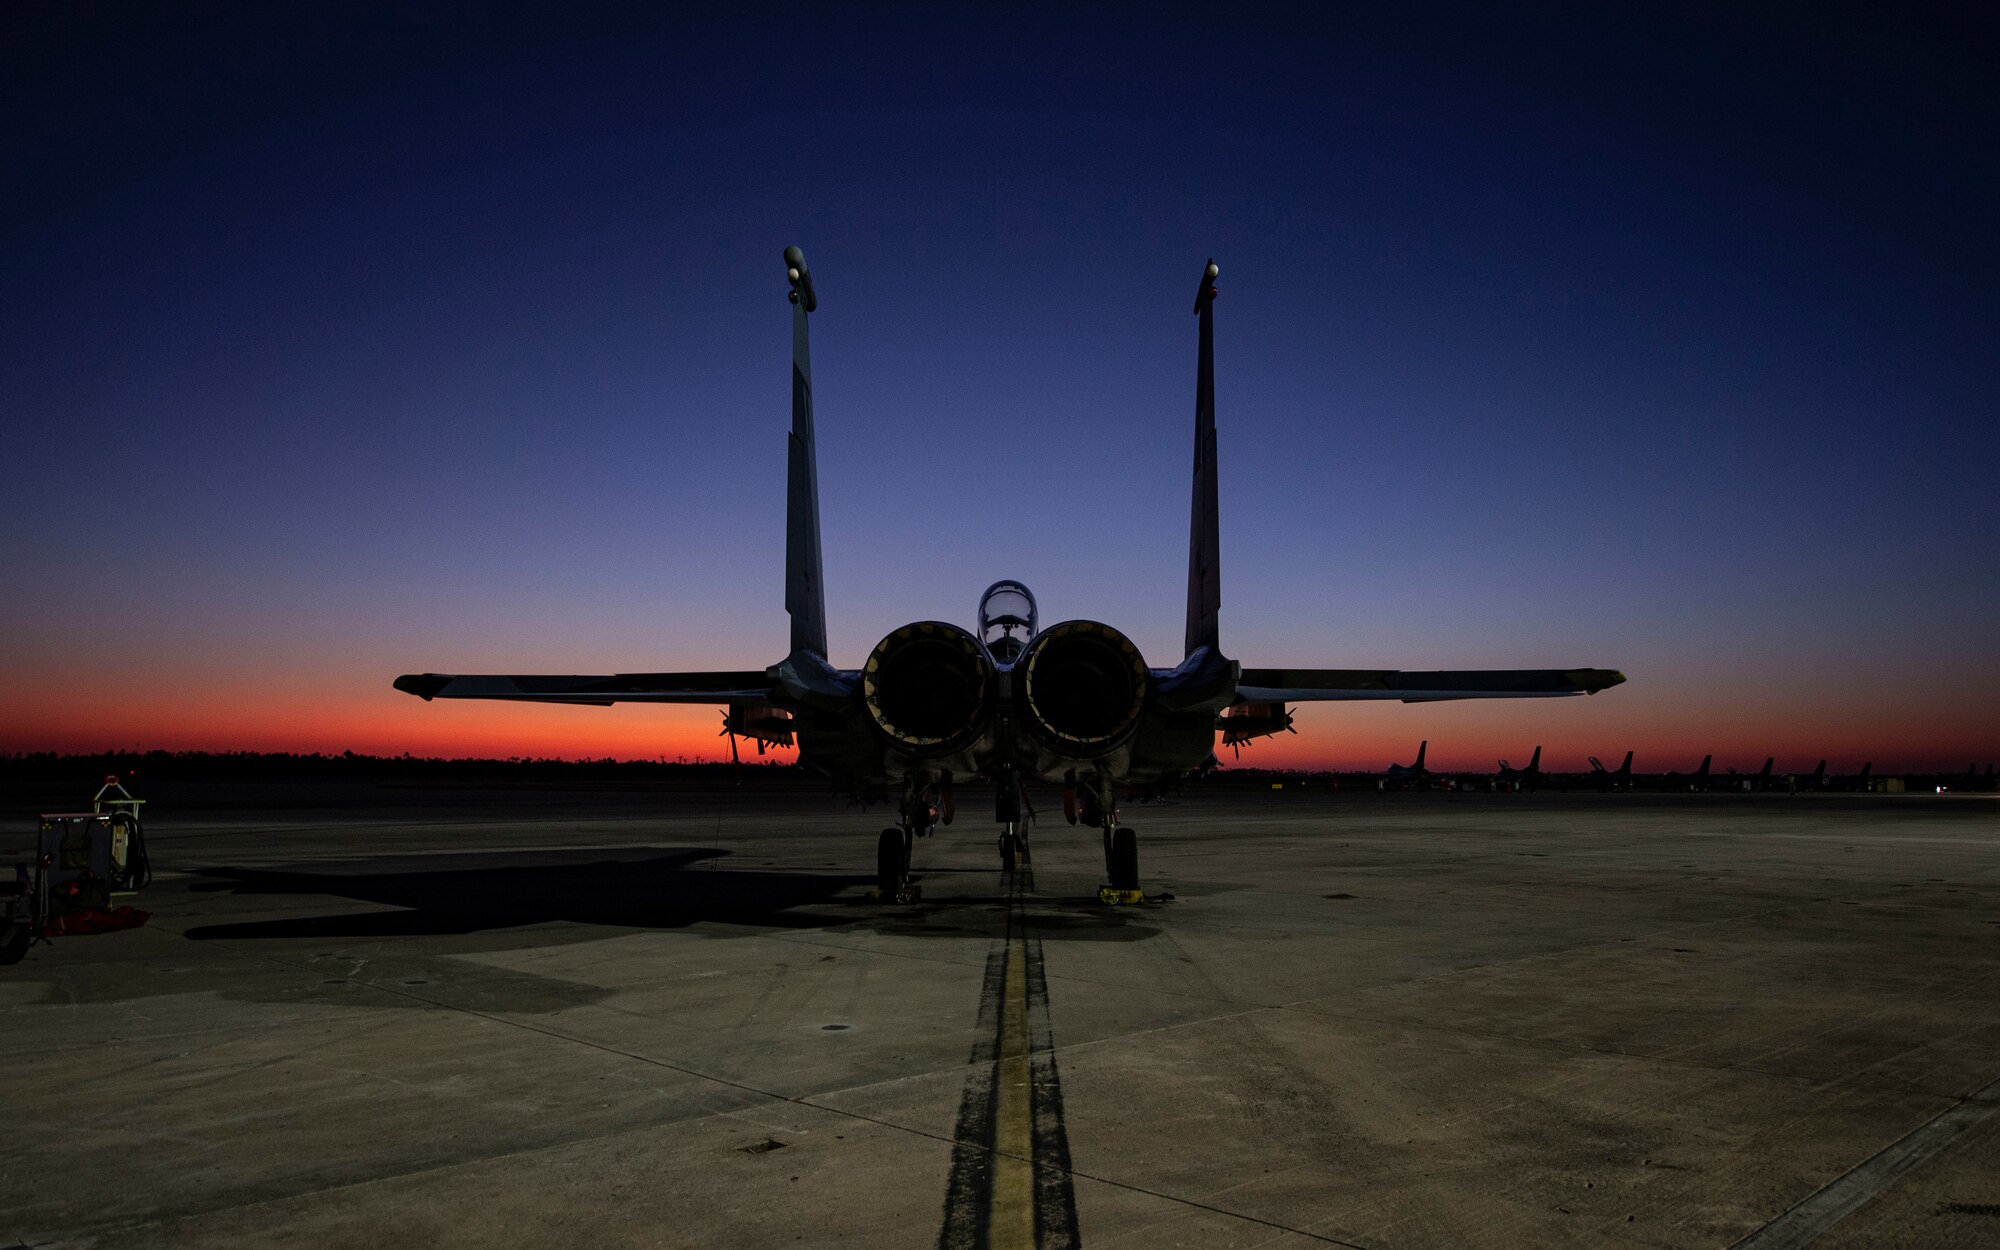 An F-15E Strike Eagle fighter jet assigned to the 422nd Test and Evaluation Squadron, Nellis Air Force Base, Nev., remains parked on the flightline during Combat Archer 19-12 on Tyndall AFB, Fla., Sept. 24, 2019. Combat Archer is part of the 53rd Wing’s Weapons System Evaluation Program. (U.S. Air Force photo by Airman 1st Class Bailee A. Darbasie)